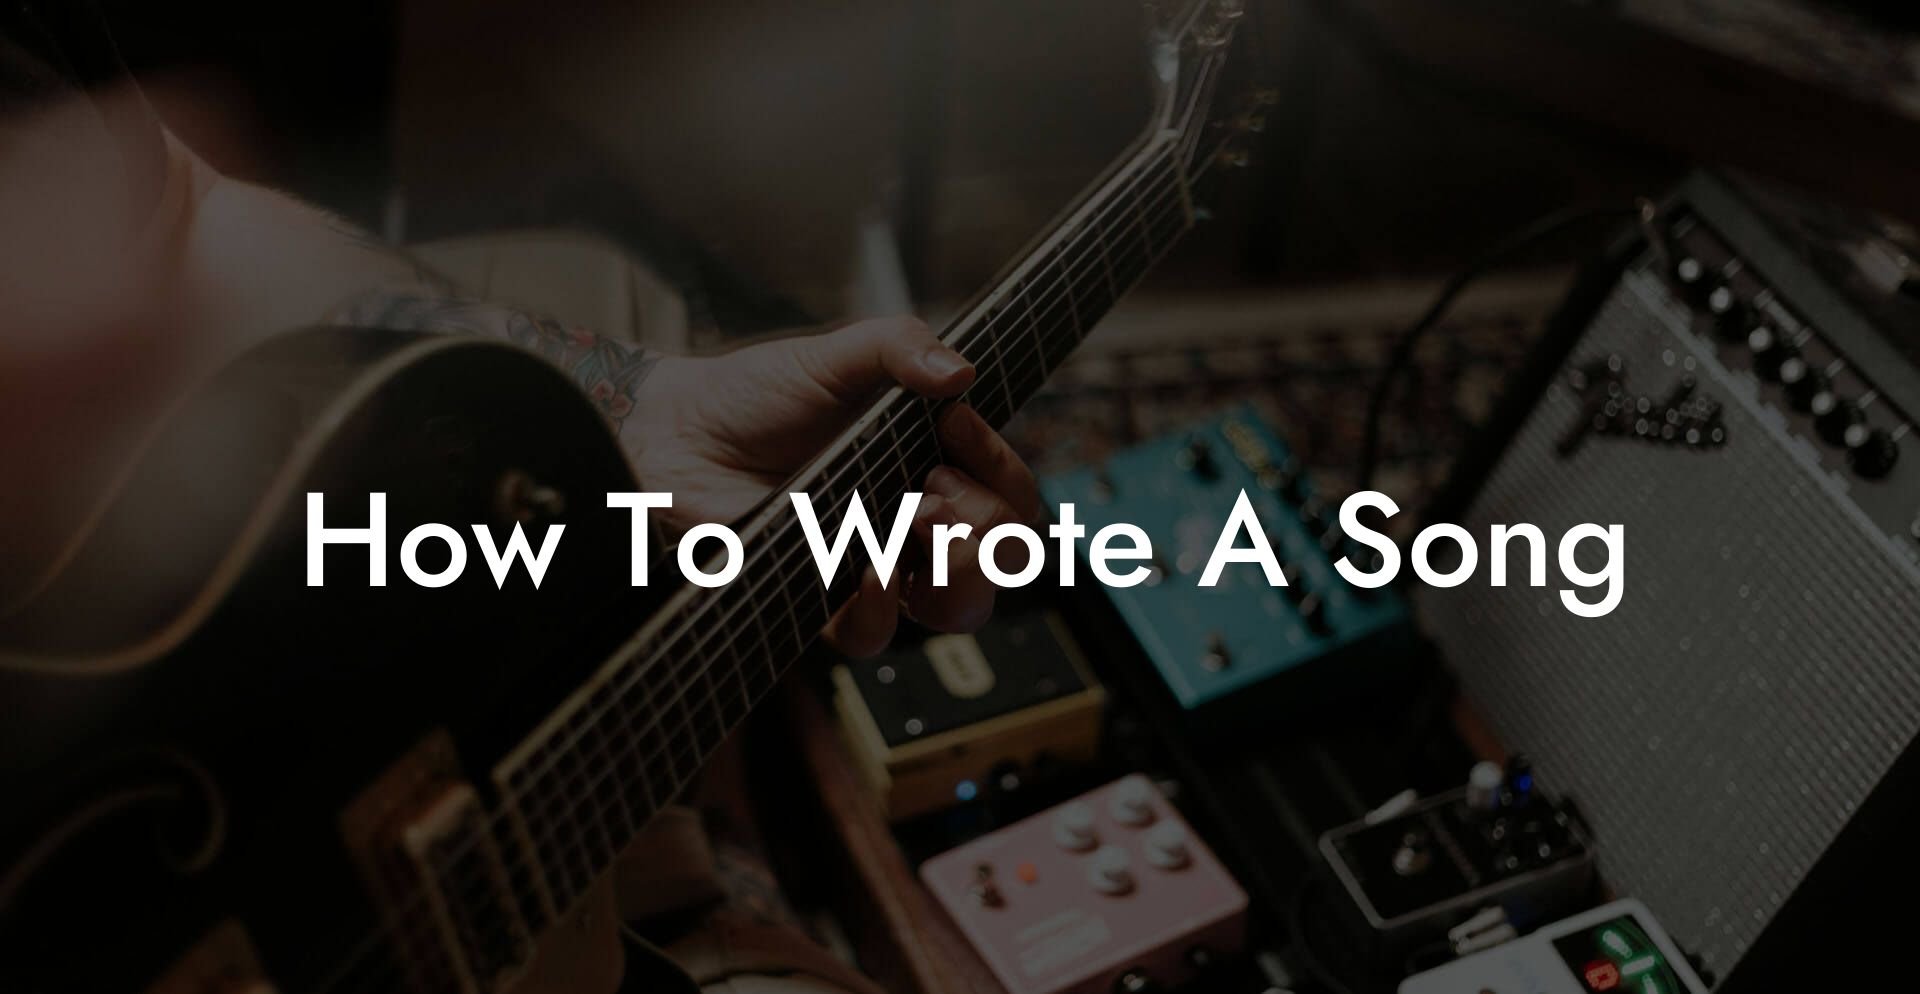 how to wrote a song lyric assistant